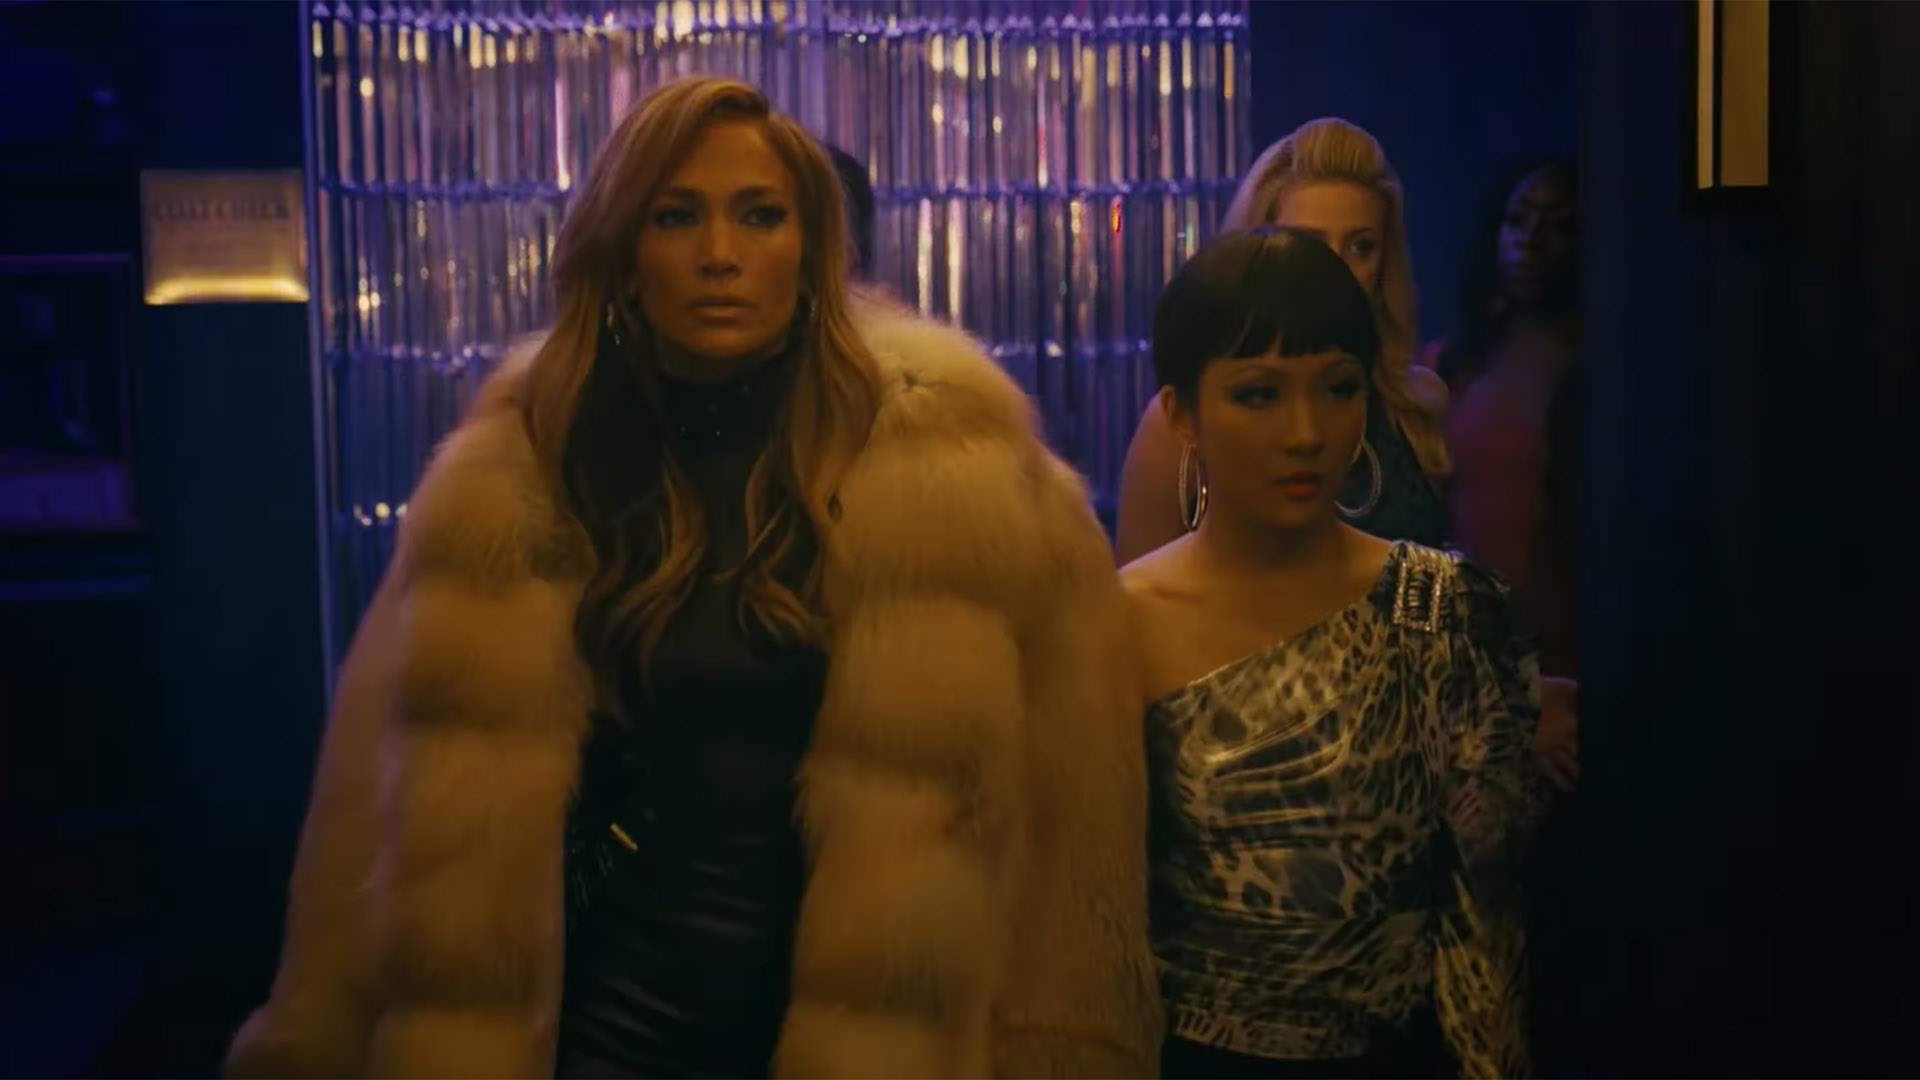 J Lo, Lizzo, Cardi B and Constance Wu Star in the First Trailer for New Comedy 'Hustlers'